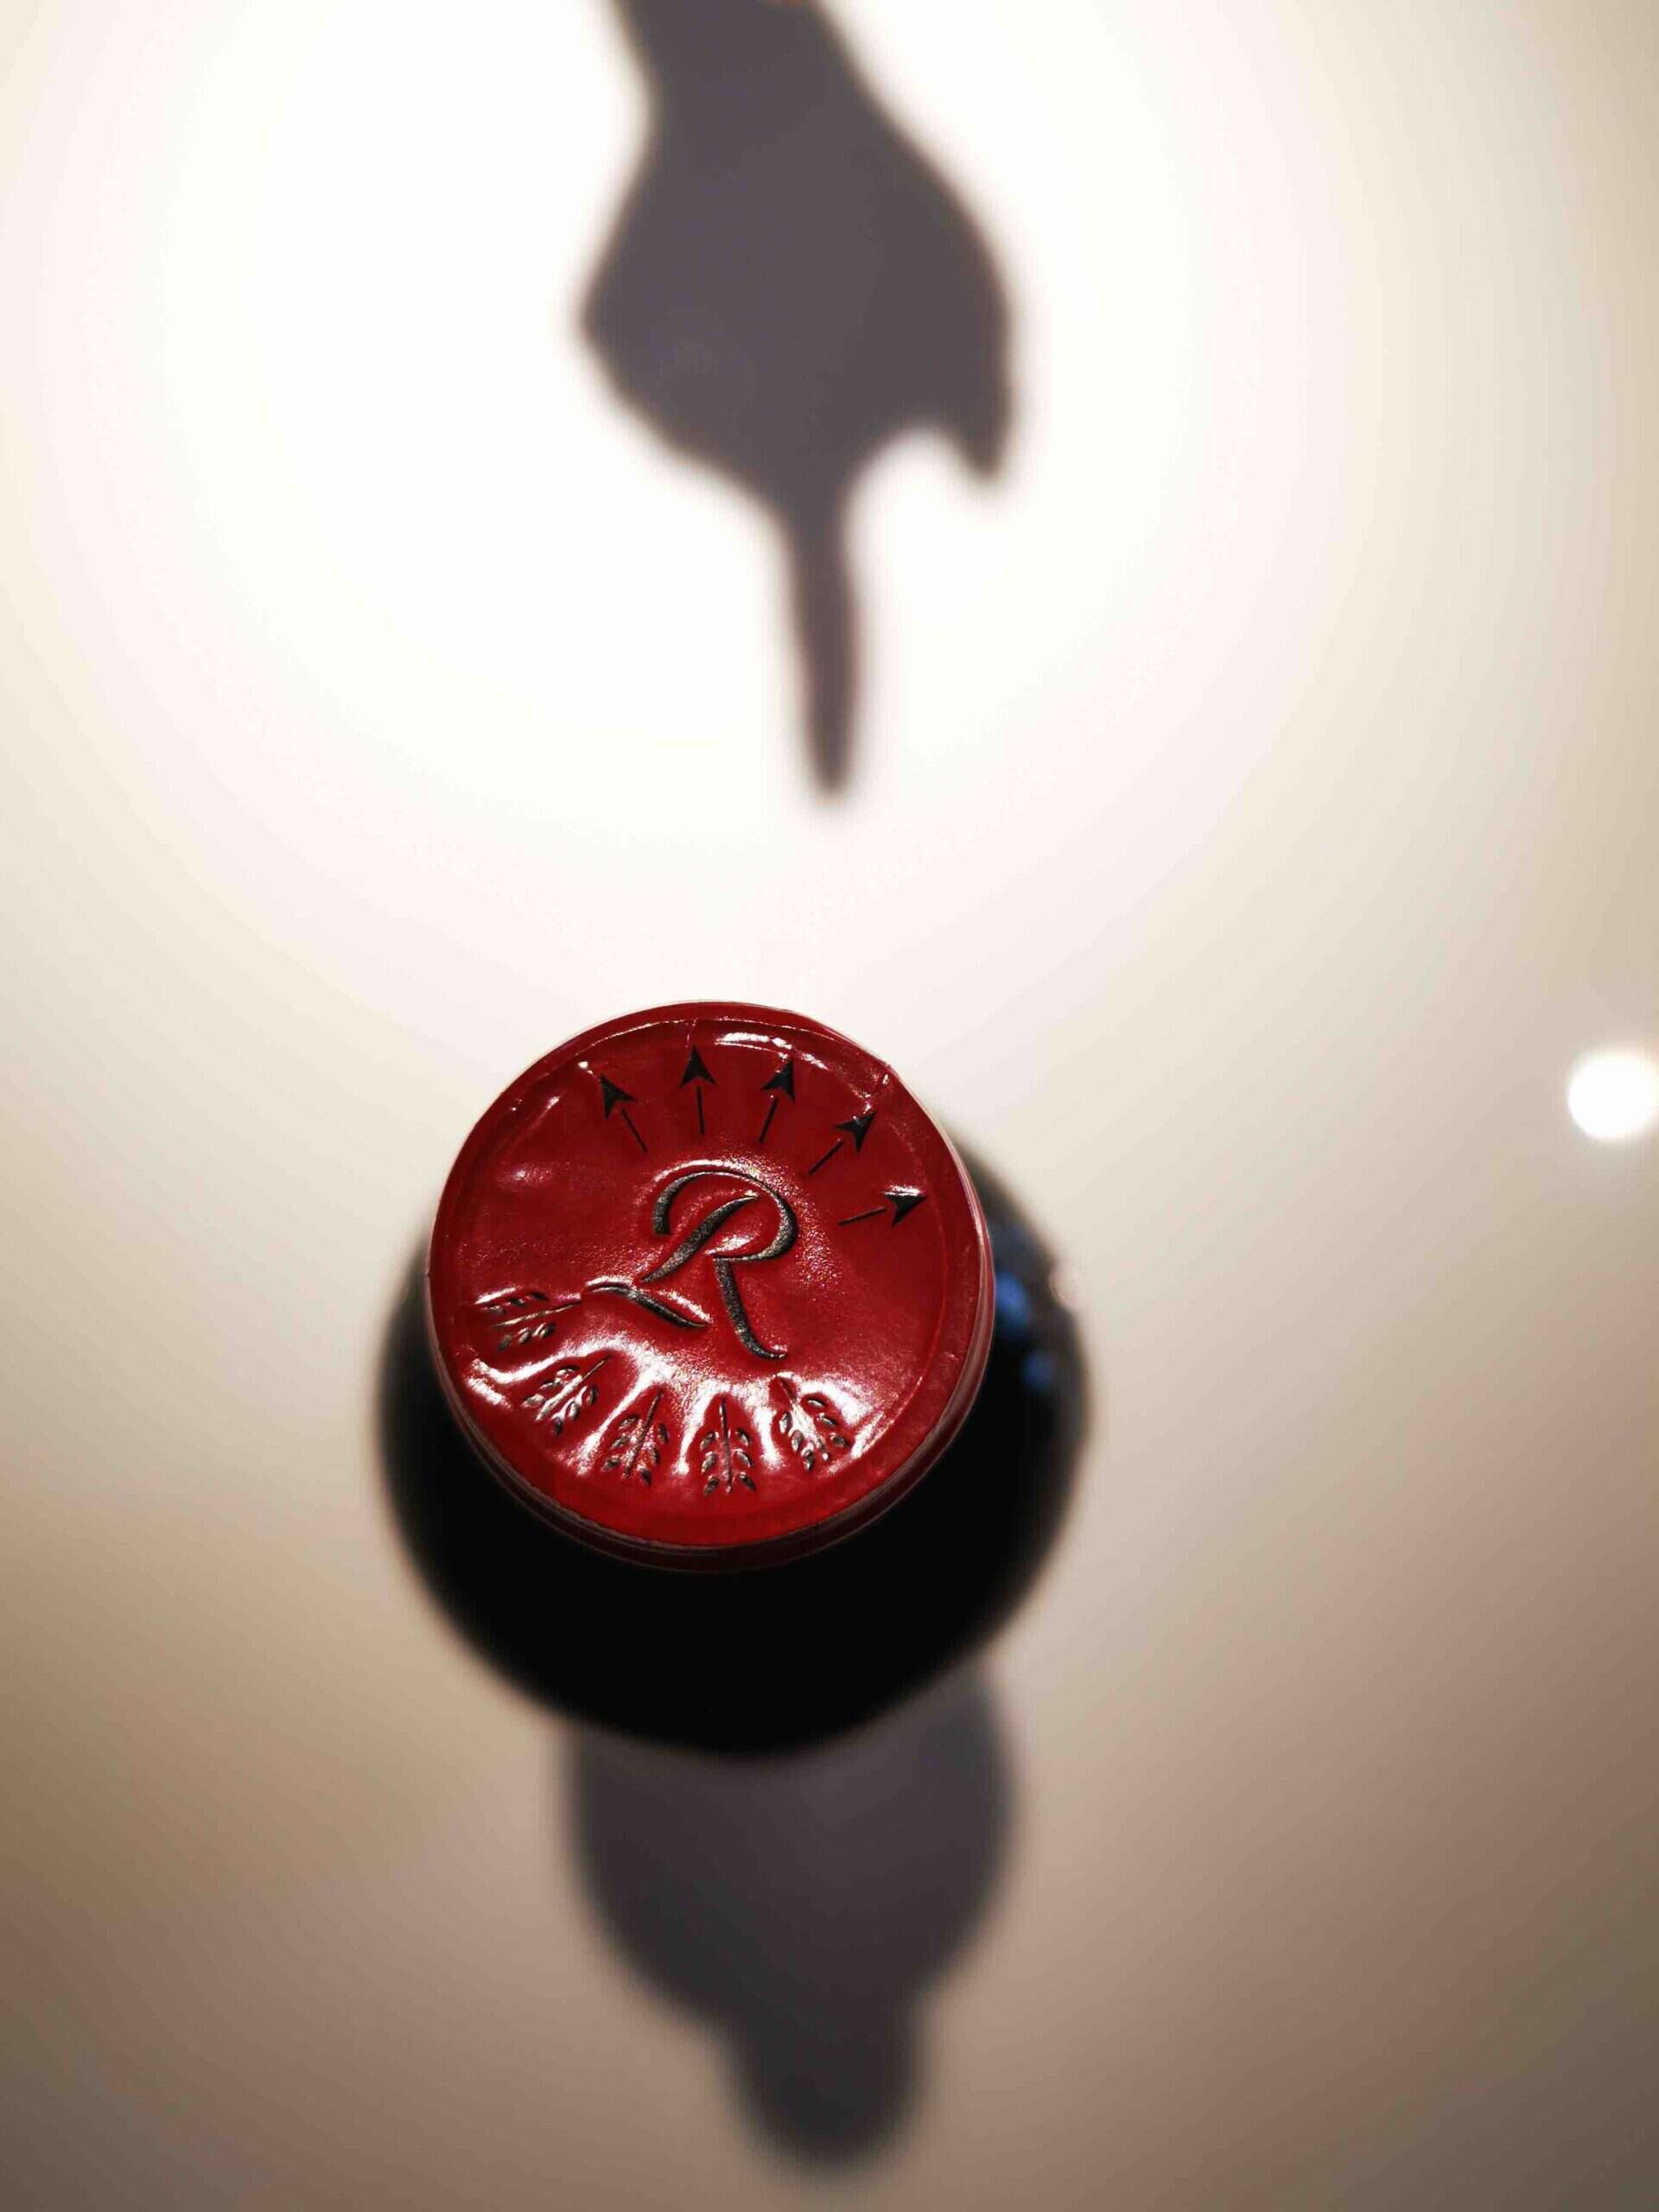 The changing faces of fine wine in China